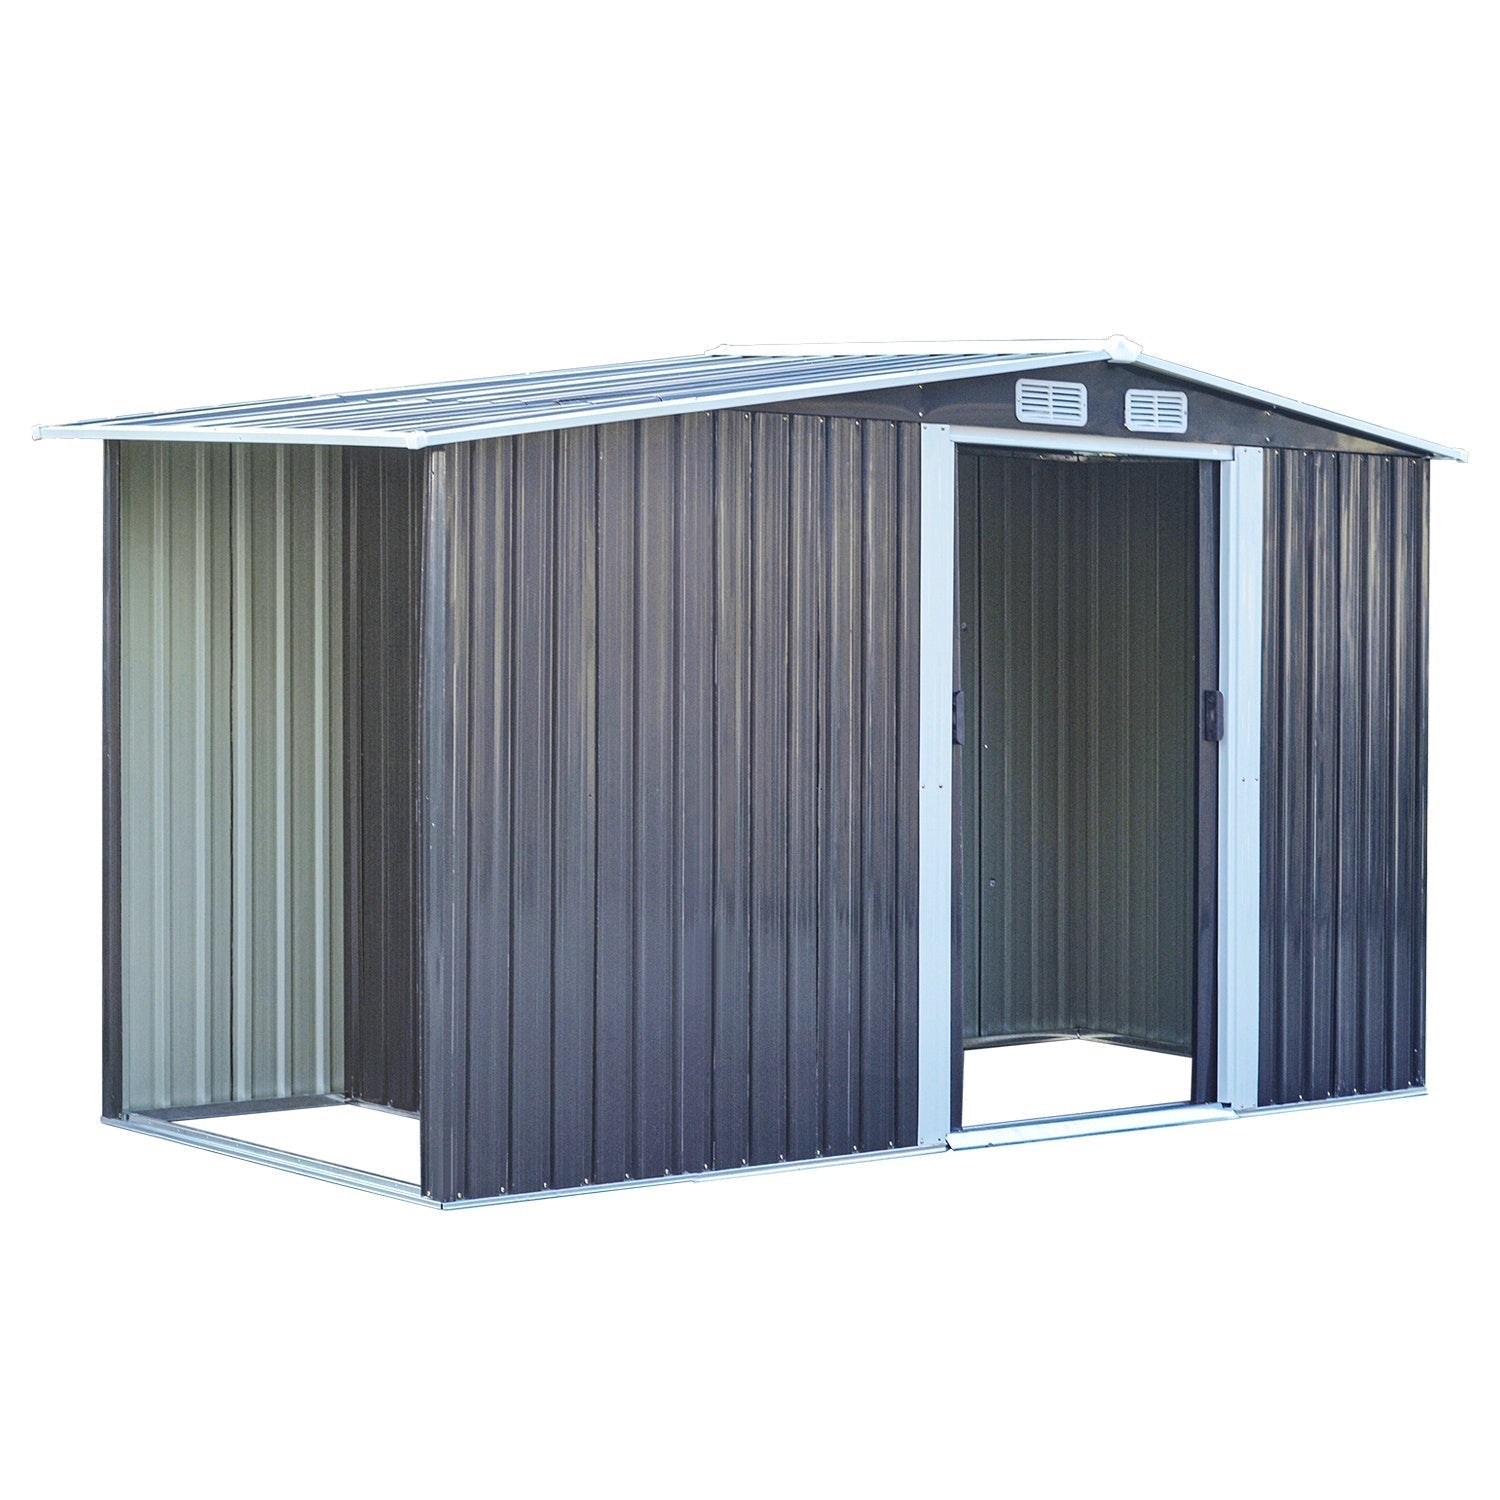 Garden Steel Shed Gable Roof Top with Firewood Storage Garden storage Garden Sanctuary 